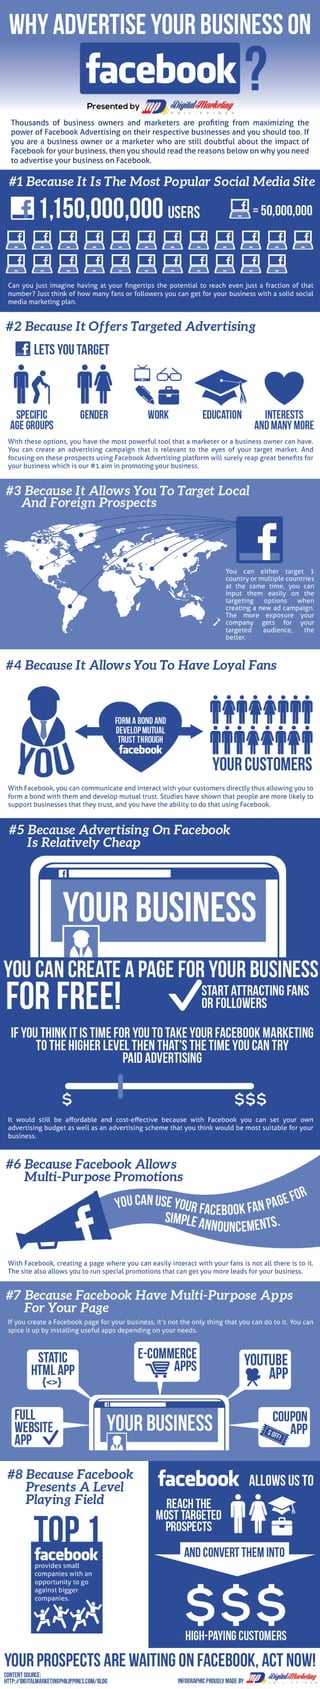 Why Advertise Your Business On Facebook? (INFOGRAPHIC)